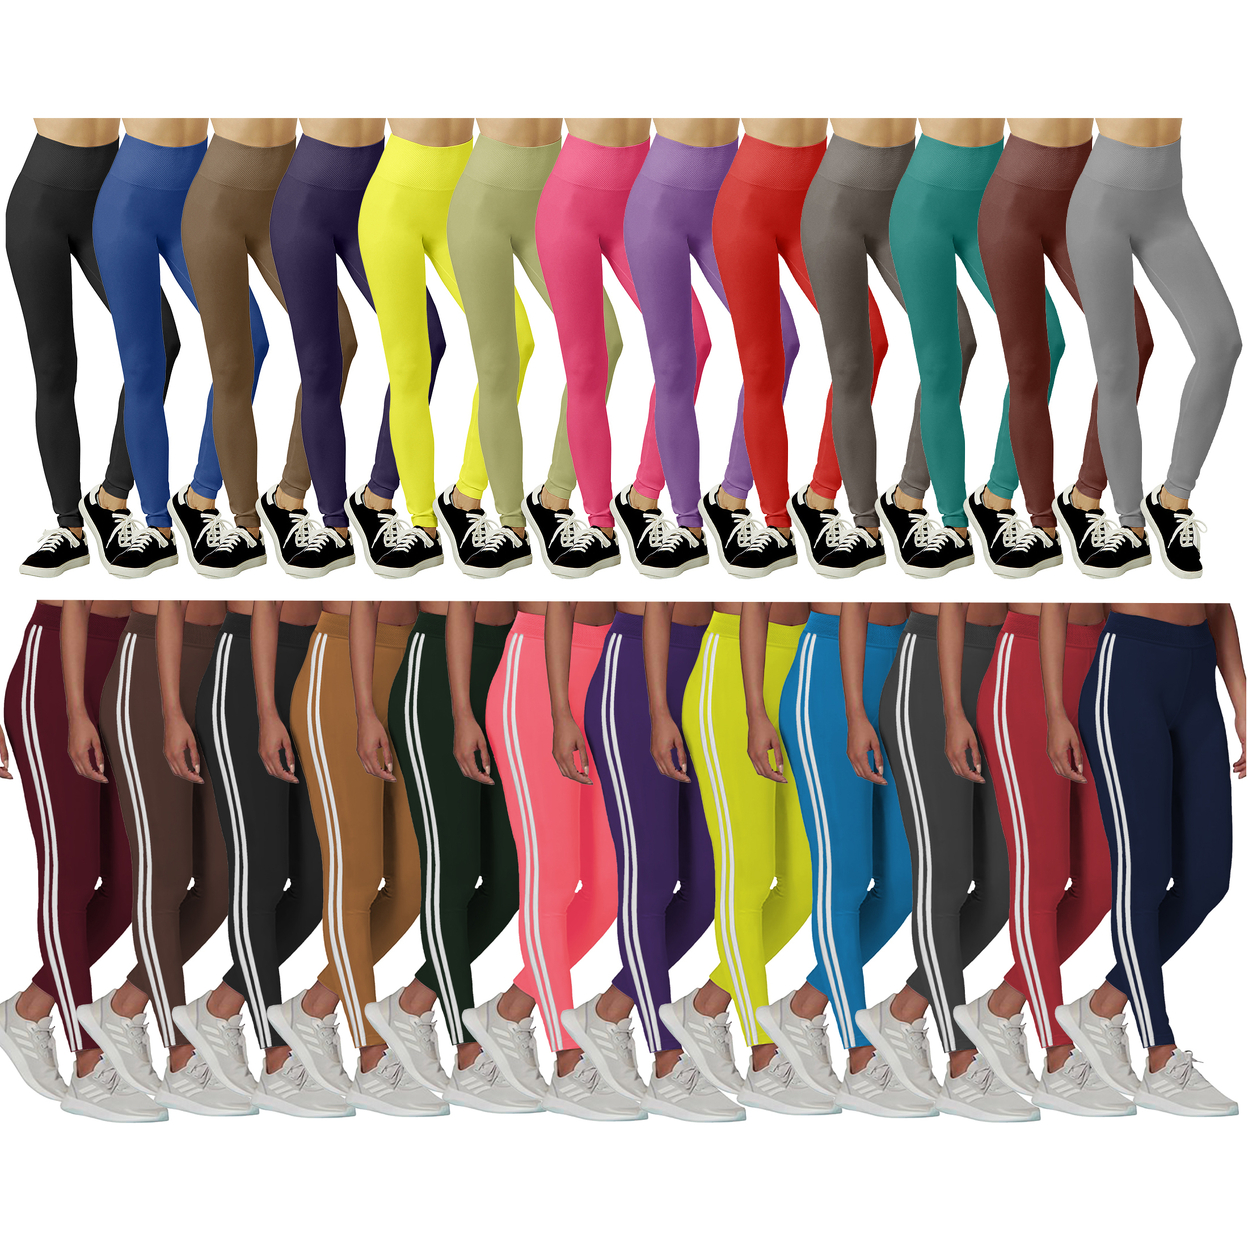 5-Pack: Women's Ultra-Soft Smooth High Waisted Fleece Lined Winter Warm Cozy Leggings - Solid, Large/x-large